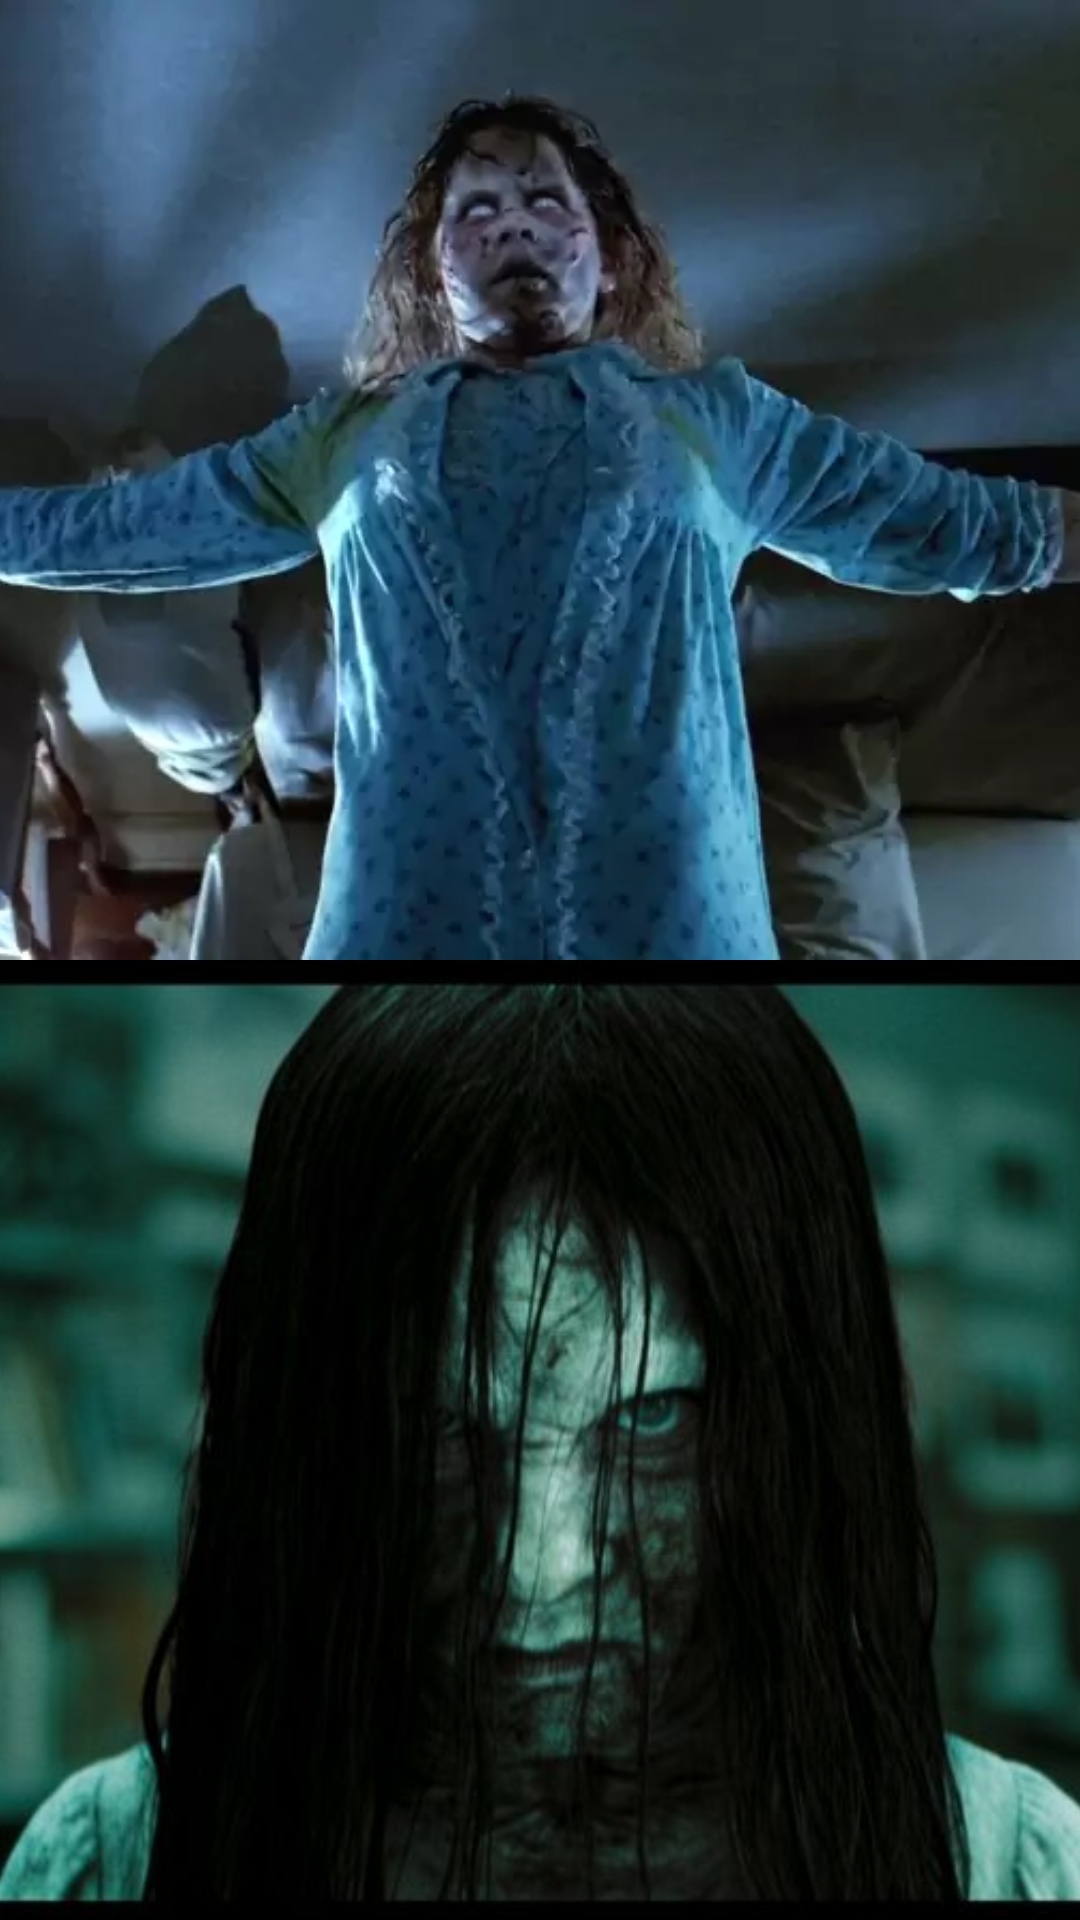 Scream Stream: The real Japanese story that helped inspire the American  supernatural horror film The Ring